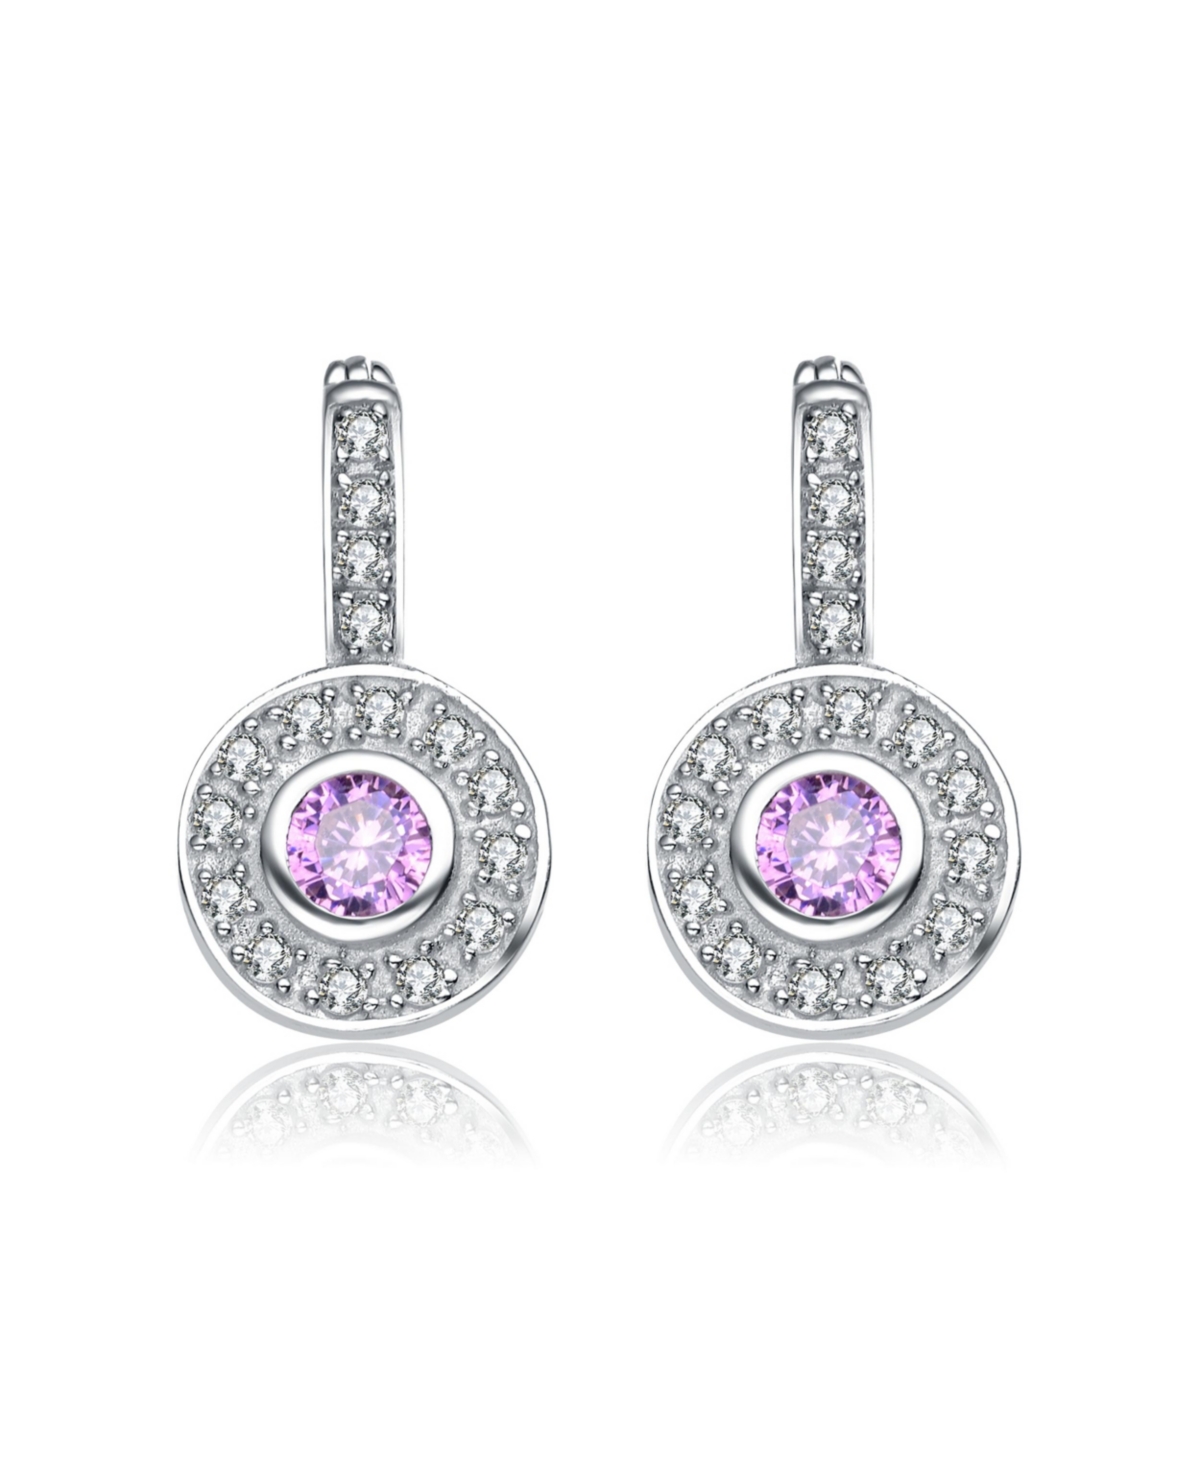 RACHEL GLAUBER MODERN WHITE GOLD PLATED ROUND DANGLE EARRINGS WITH PINK CUBIC ZIRCONIA